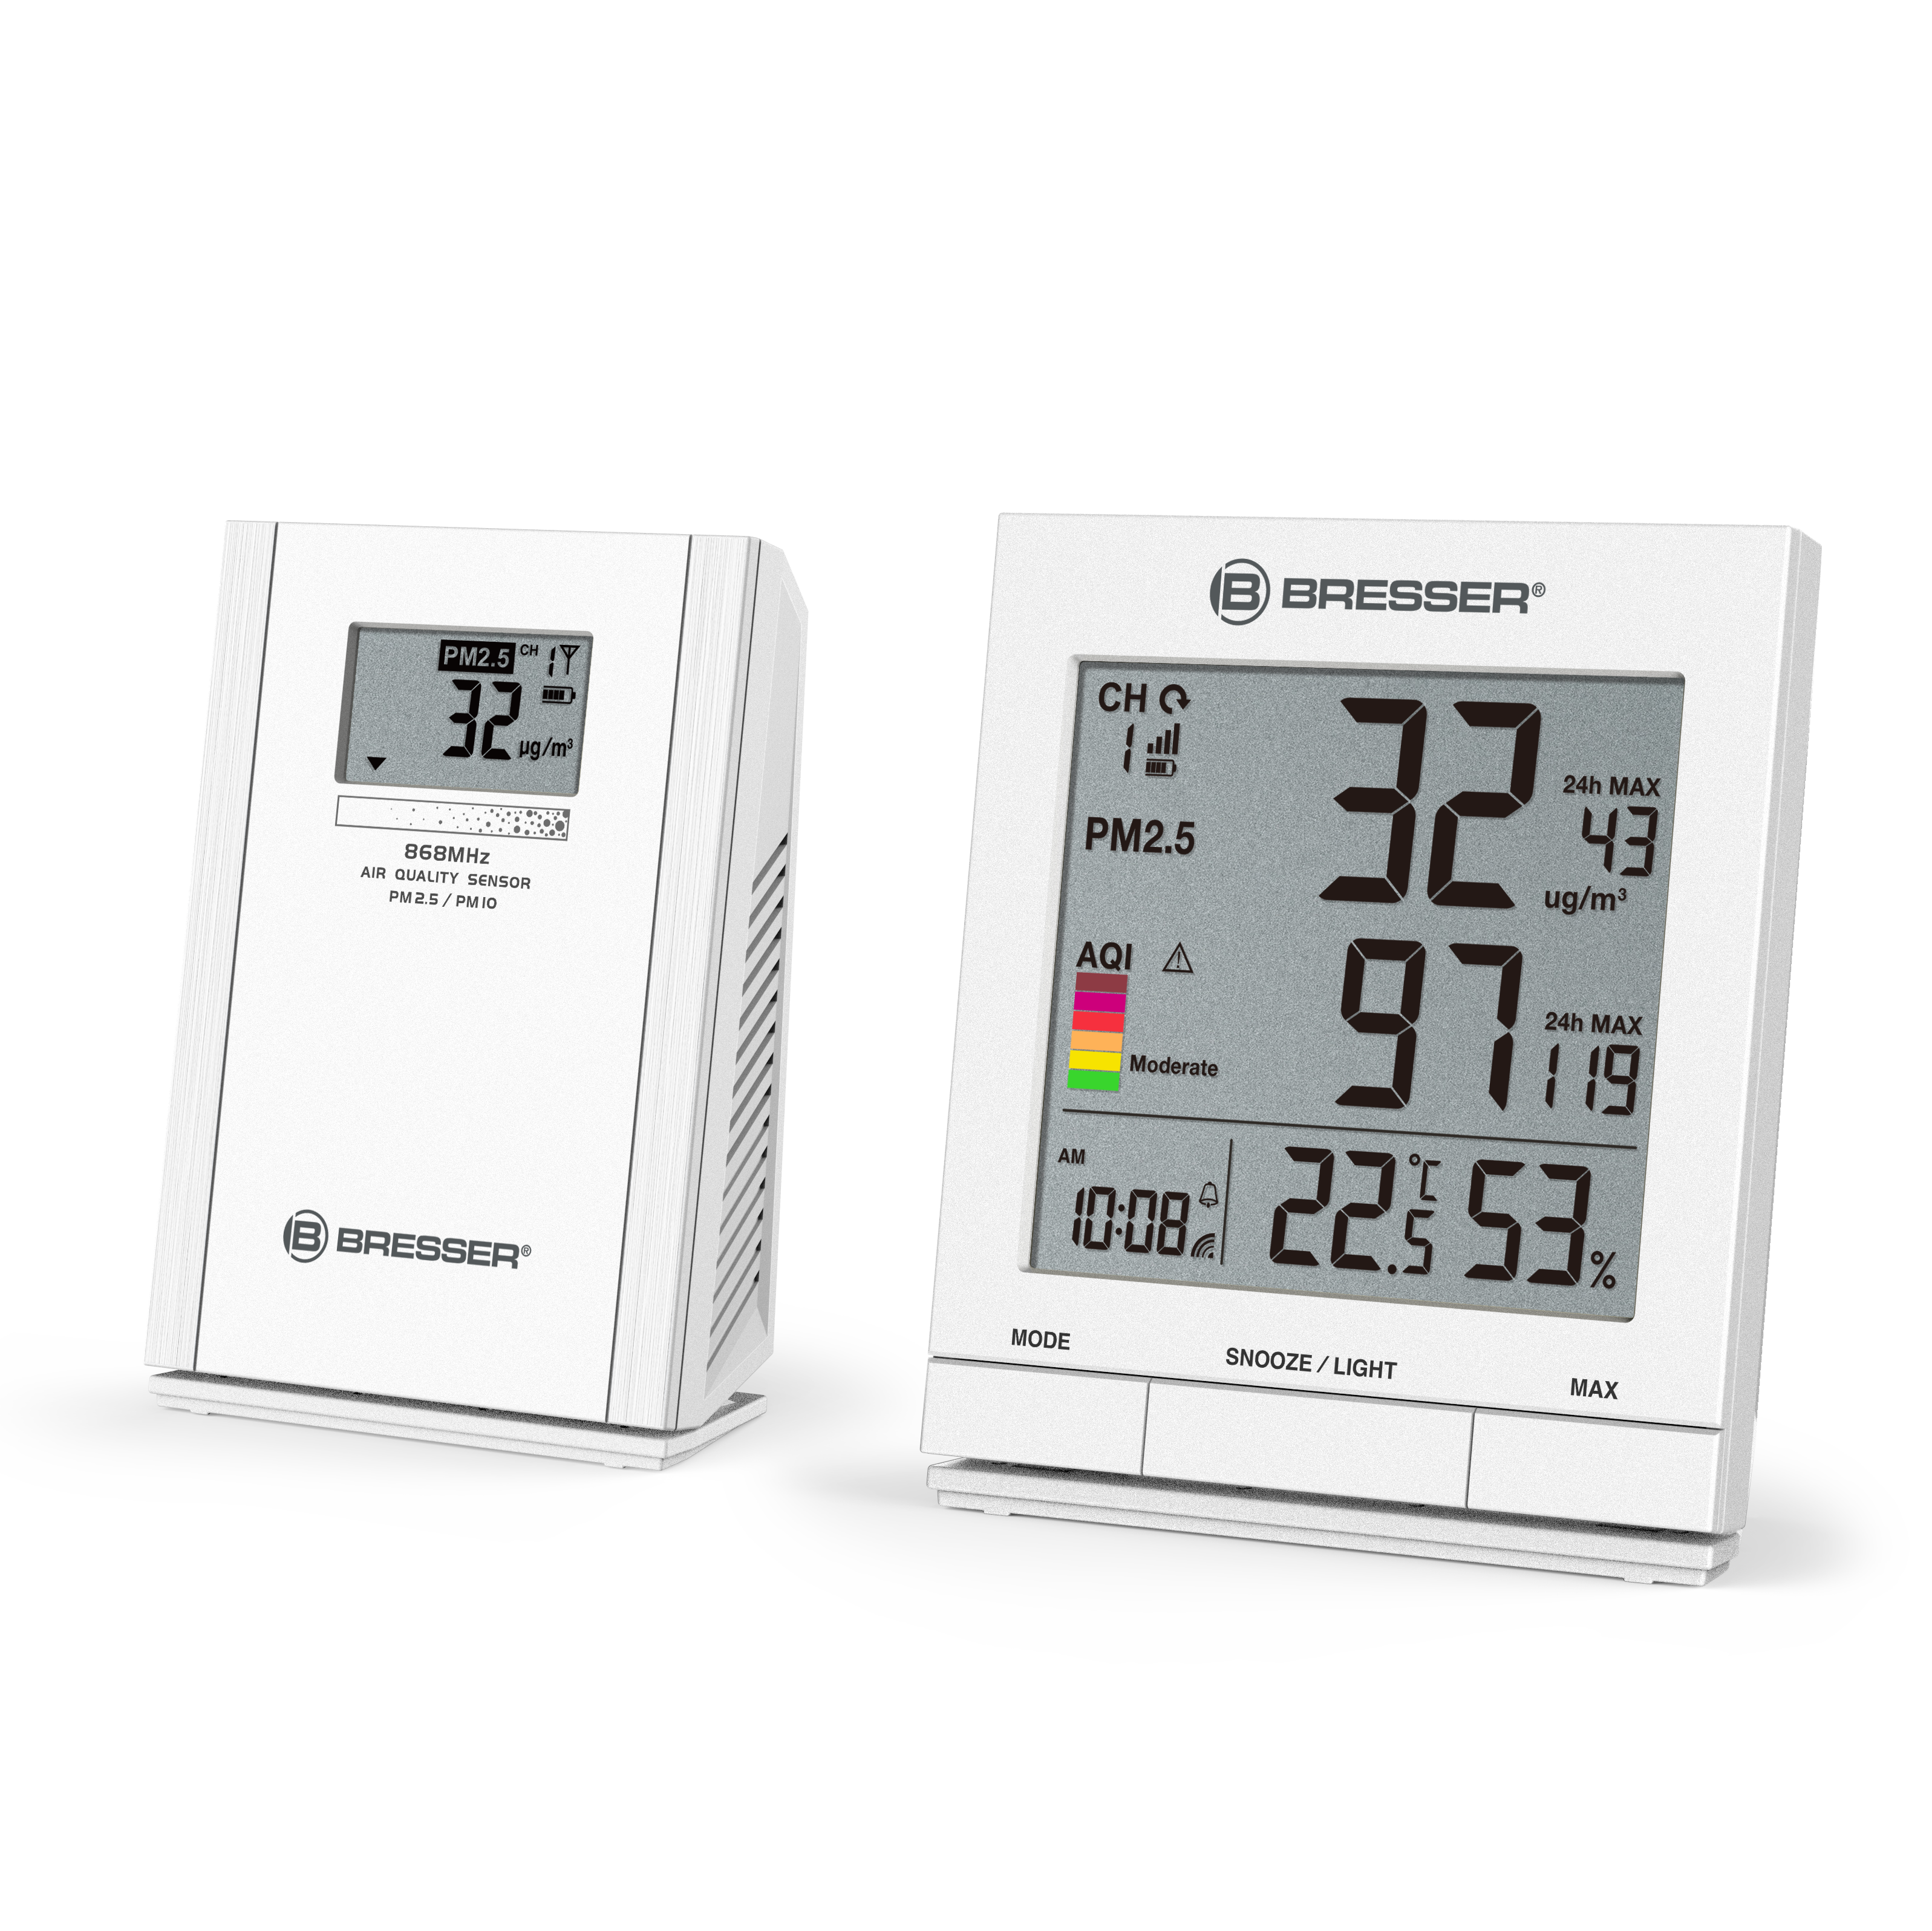 BRESSER PM2.5 / PM10 Particulate meter with wireless sensor